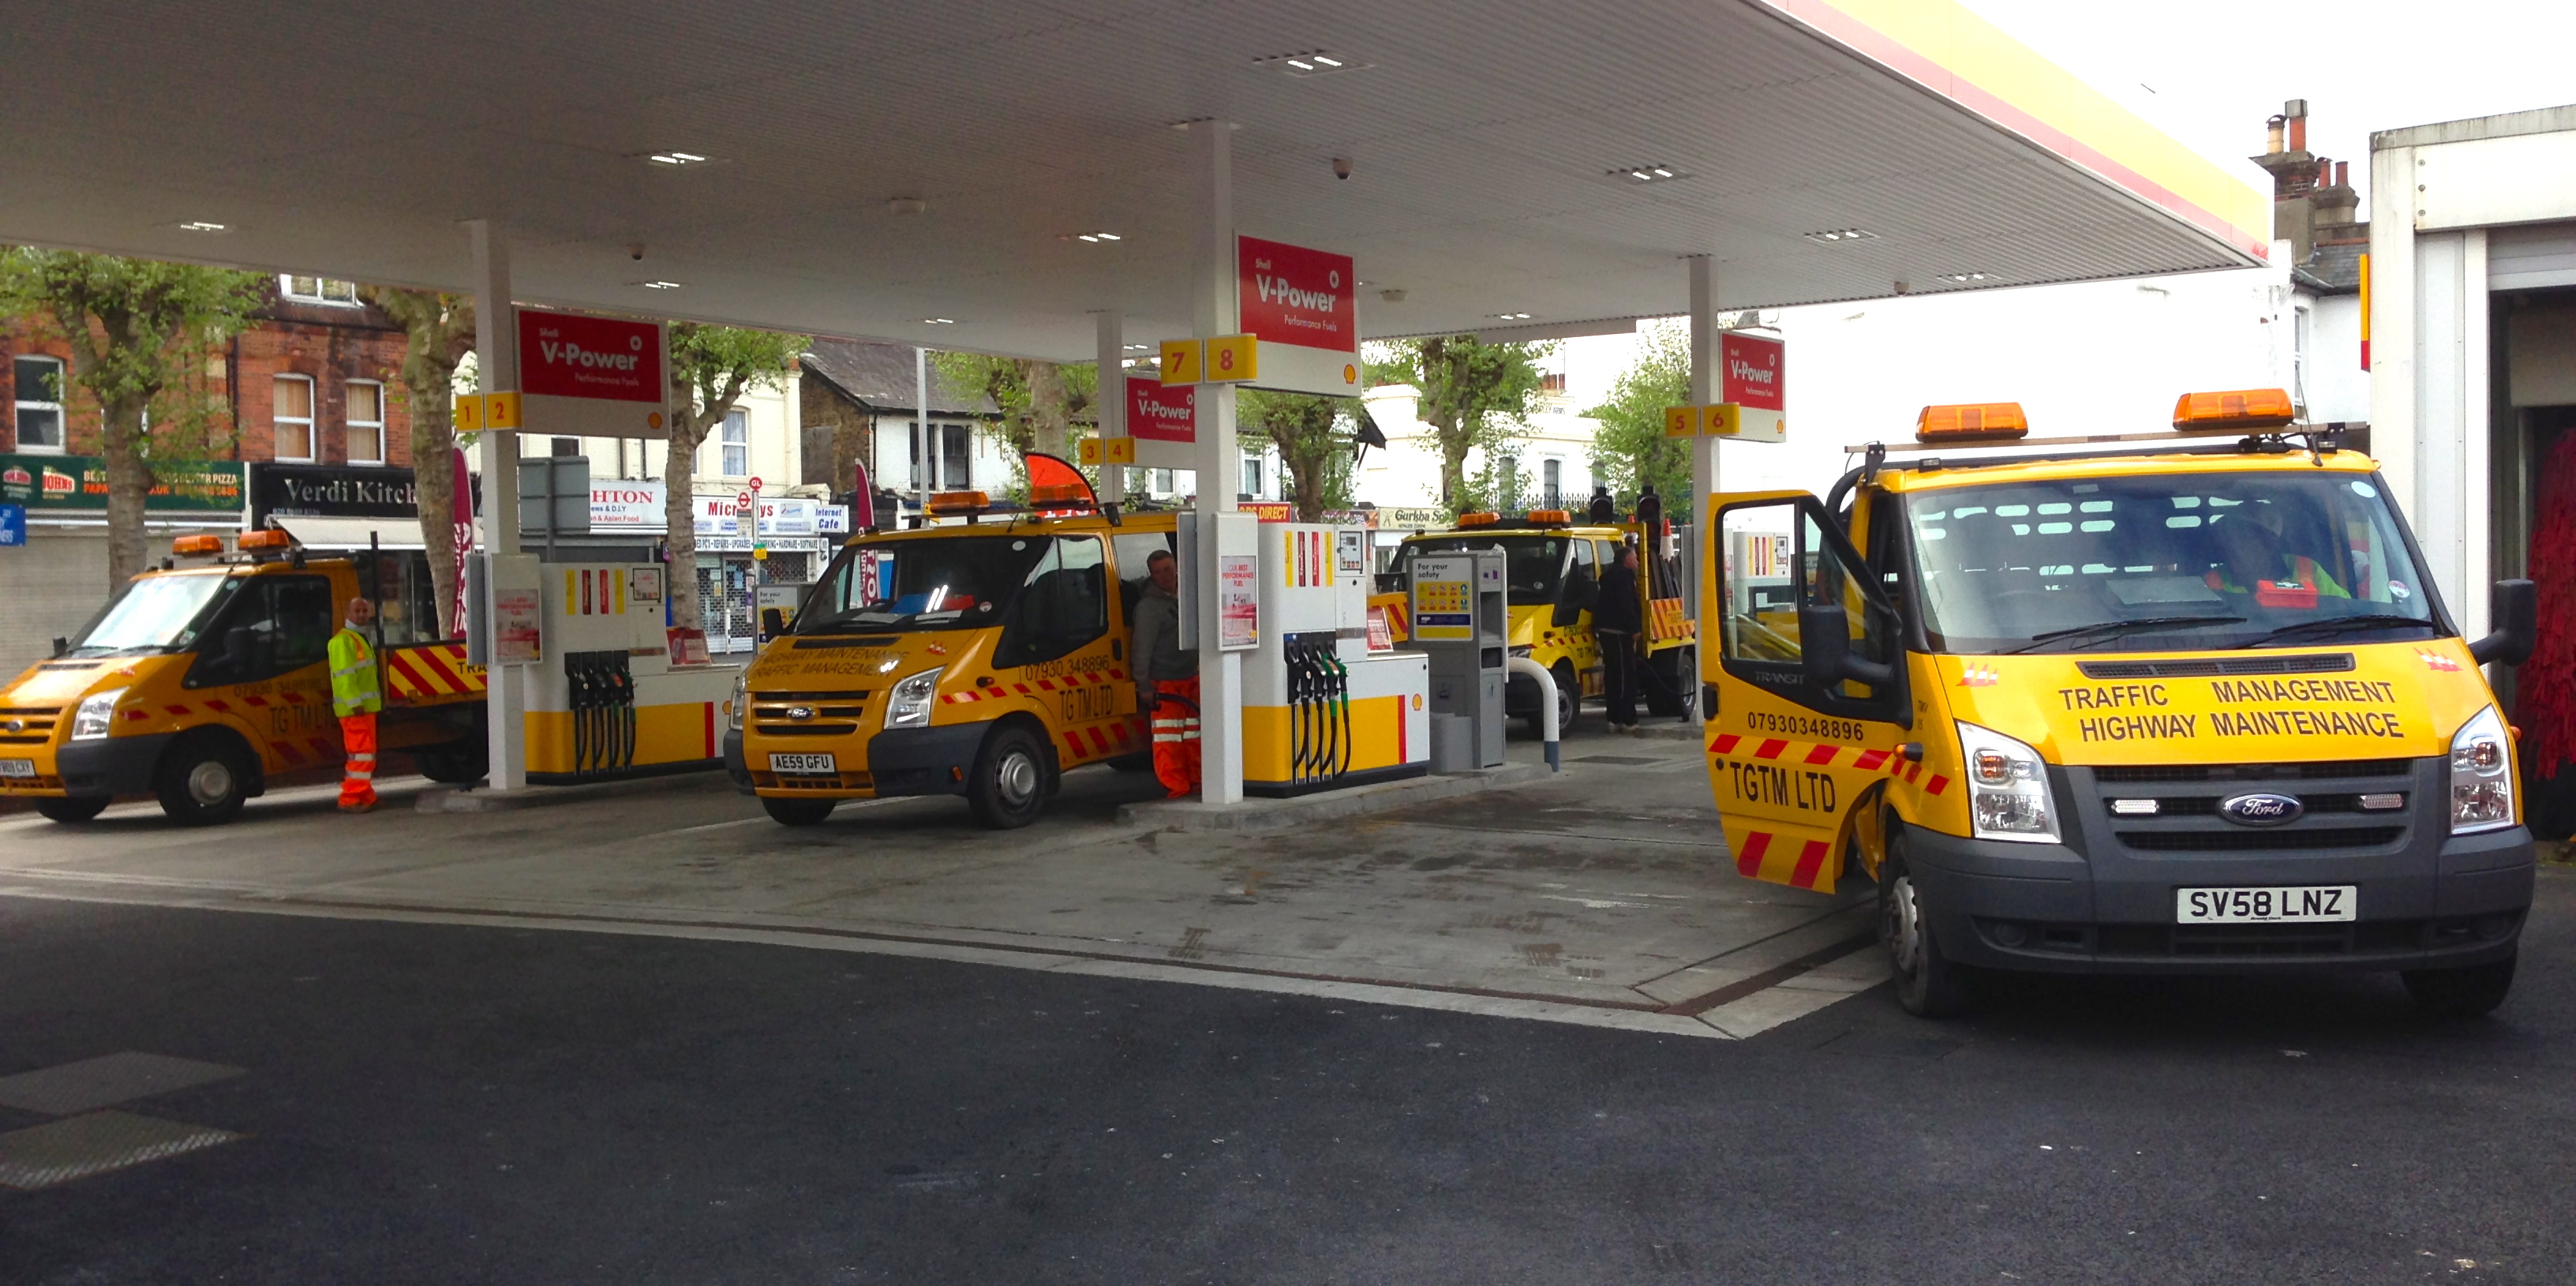 Traffic Management Vehicles in Petrol Station